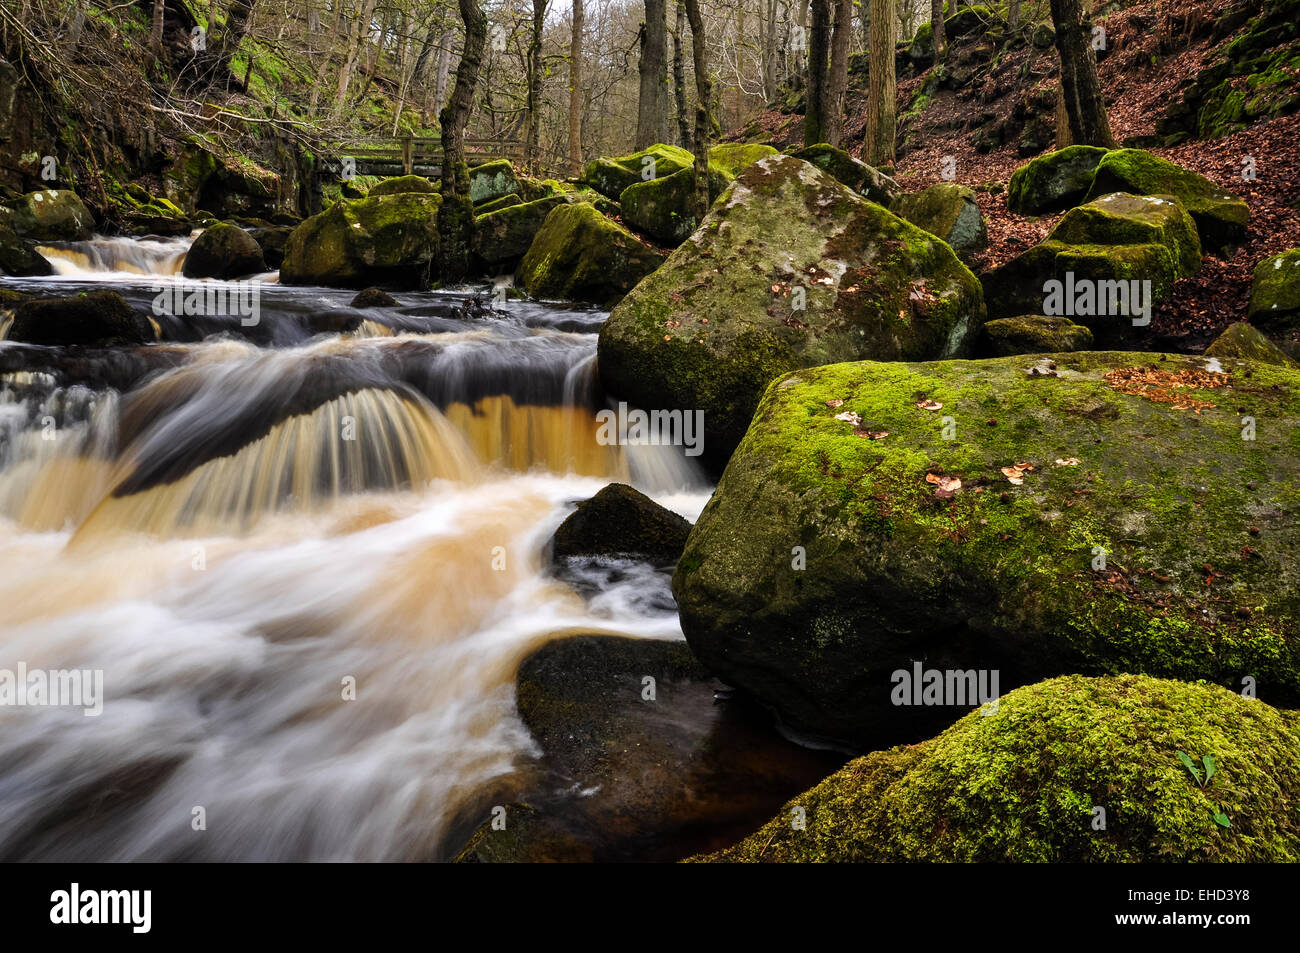 Flowing water at Padley Gorge in the Peak District, Derbyshire. Stock Photo